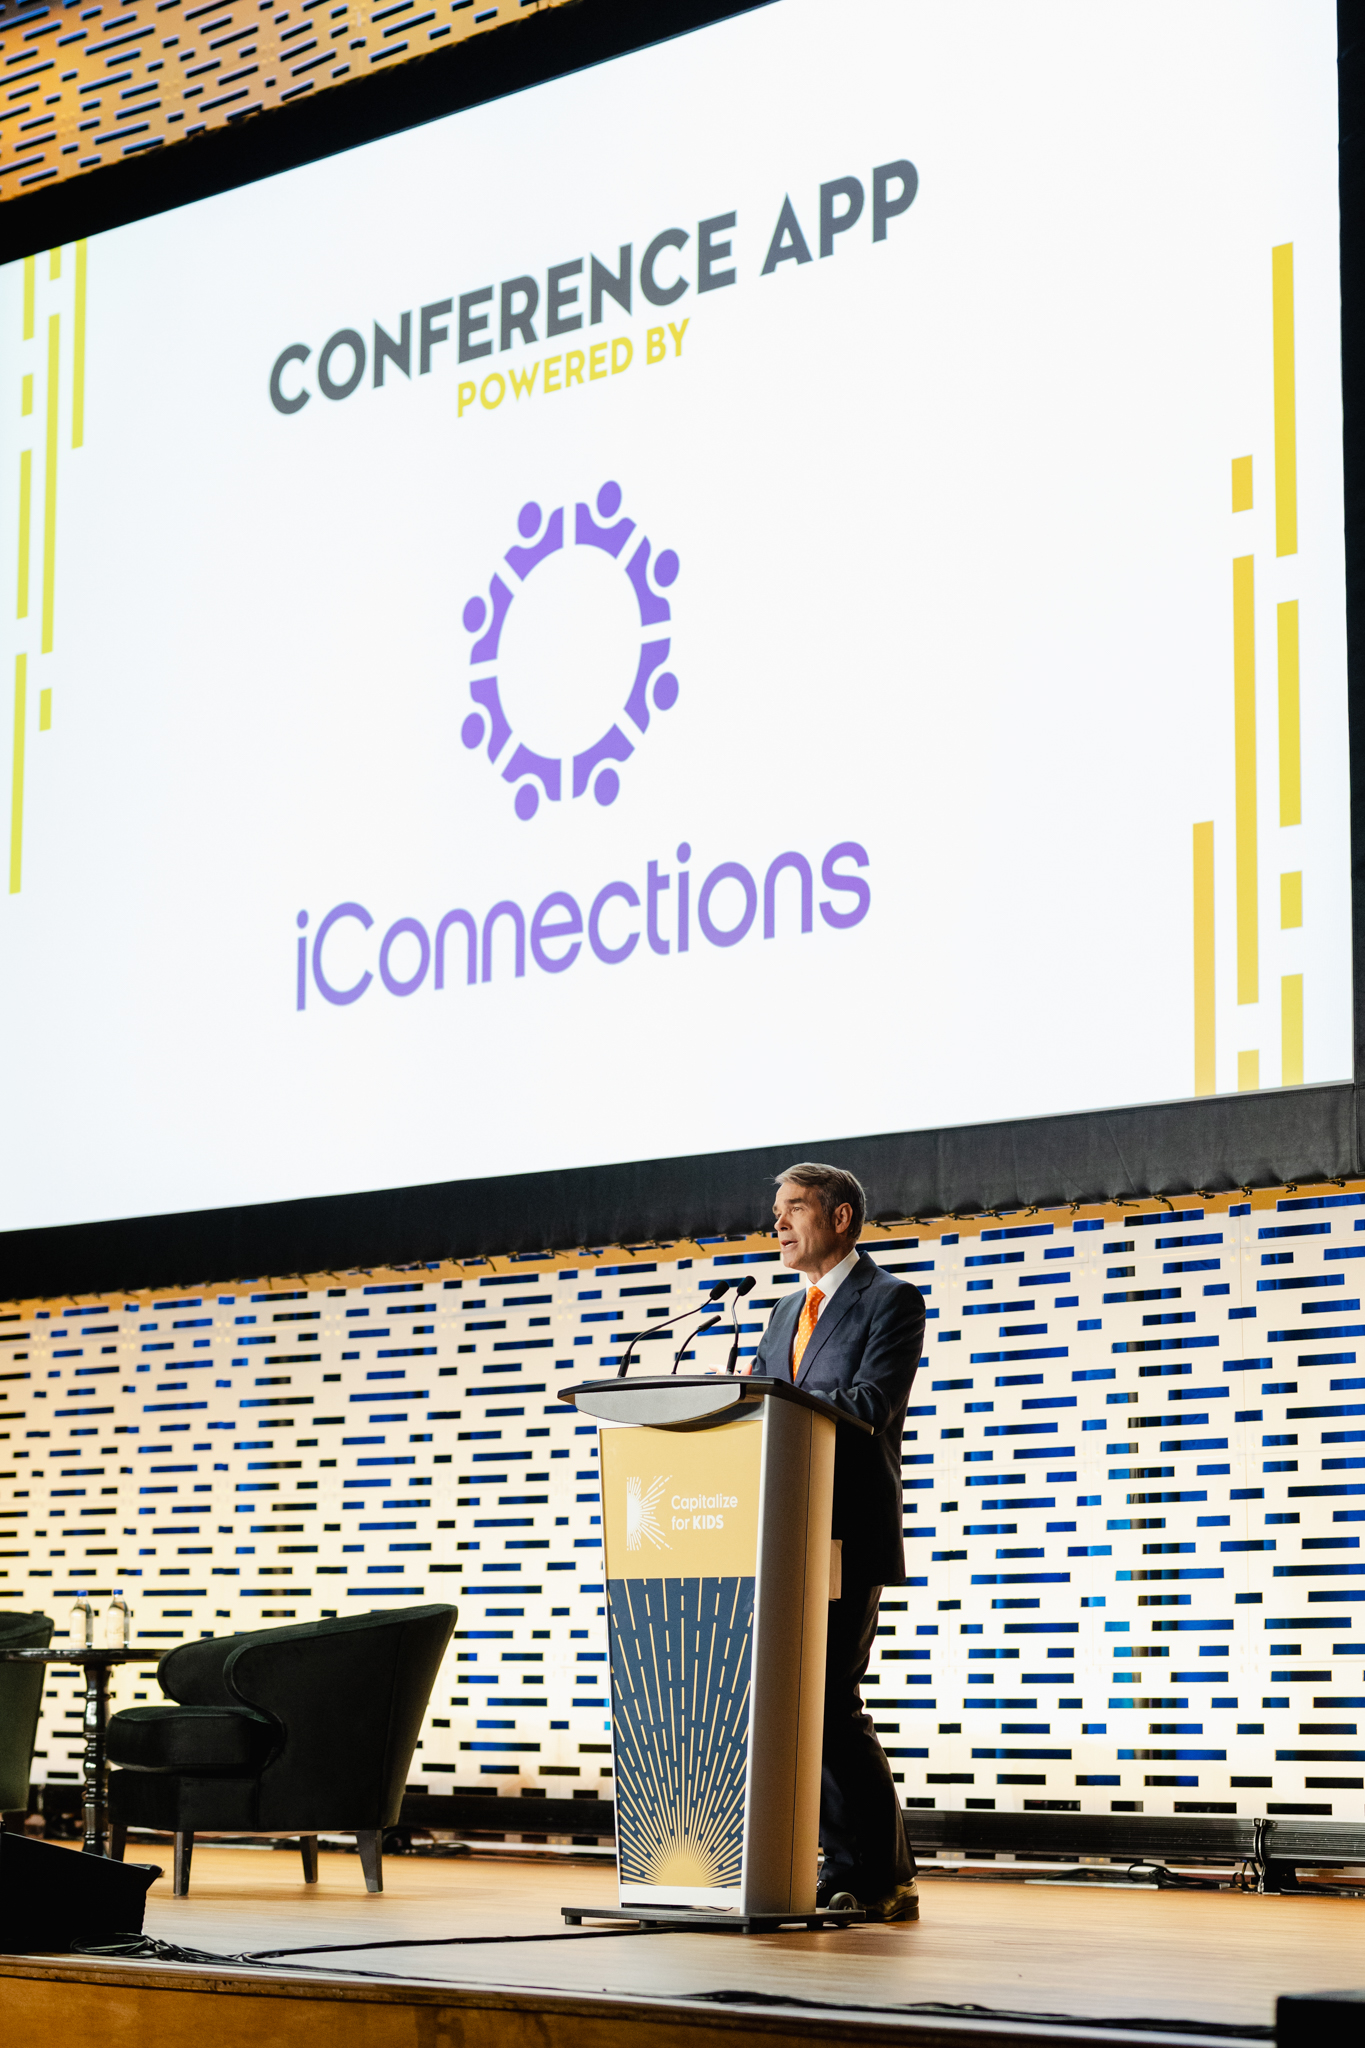 A man standing in front of a screen displaying the words "conference app" for conference photography.